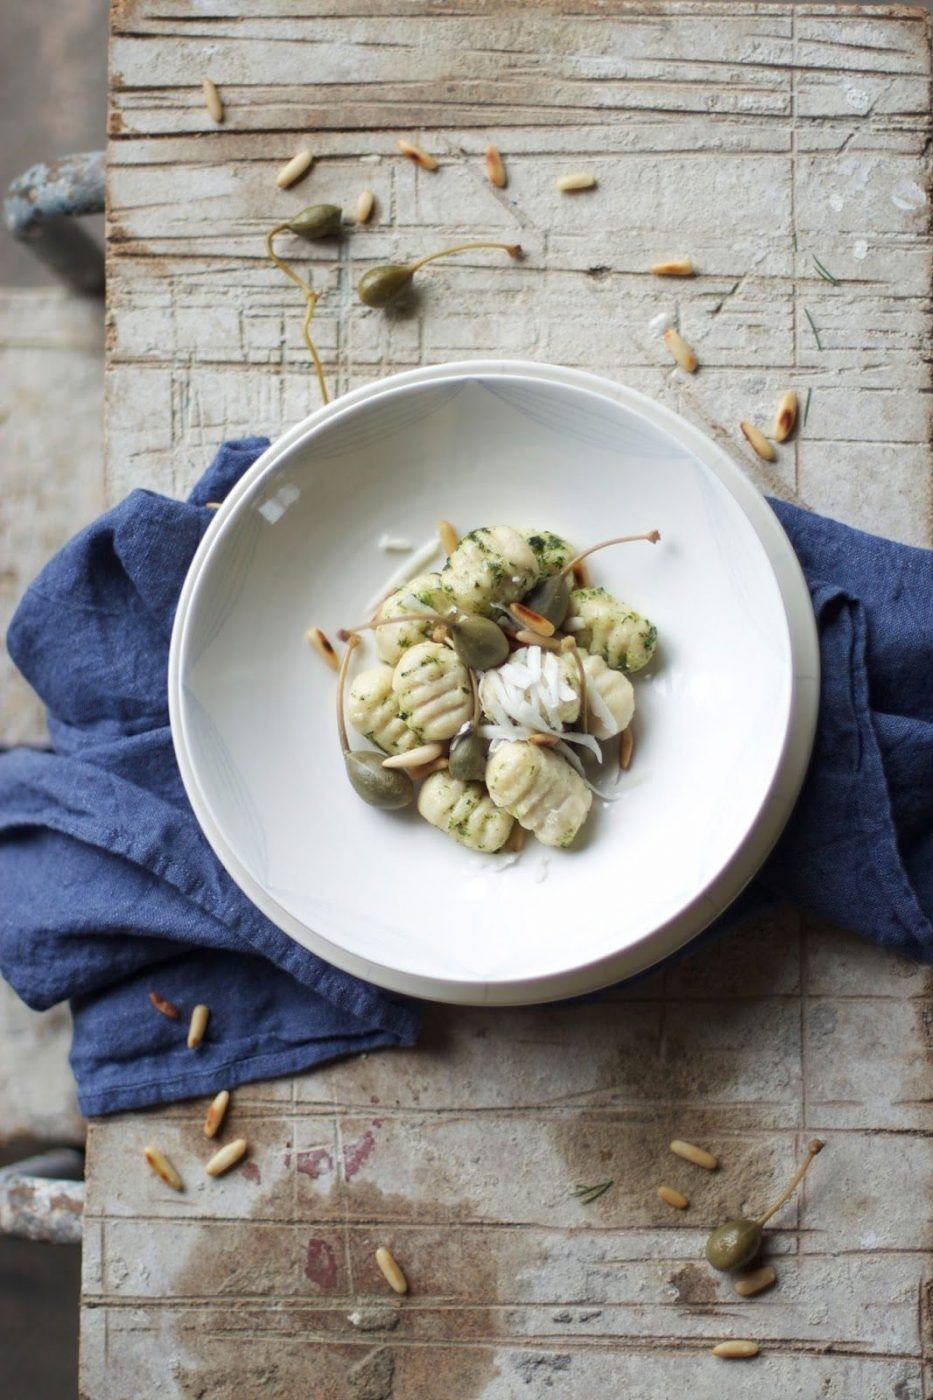 Image for Gluten-free Gnocchi with Green Pesto and Capers